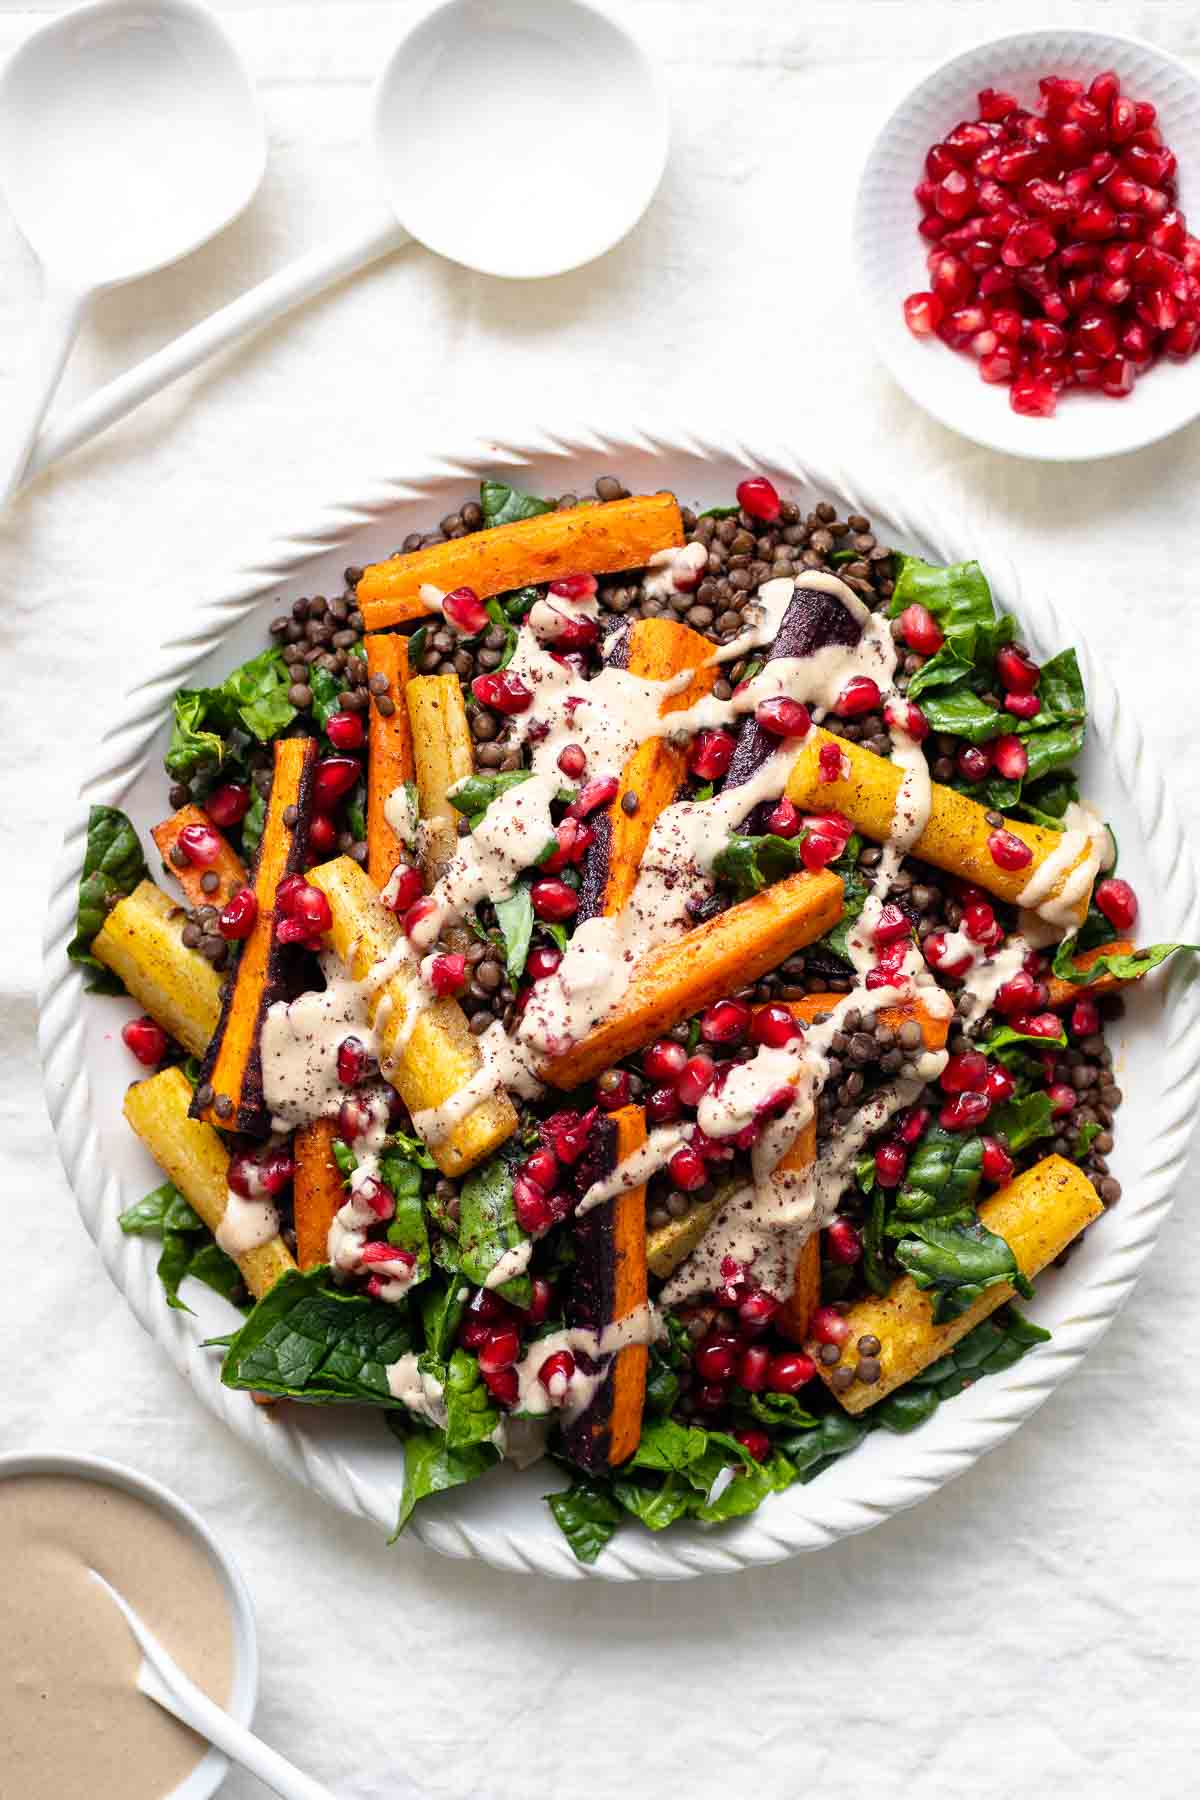 Roasted Carrot Lentil Salad with Tahini Dressing